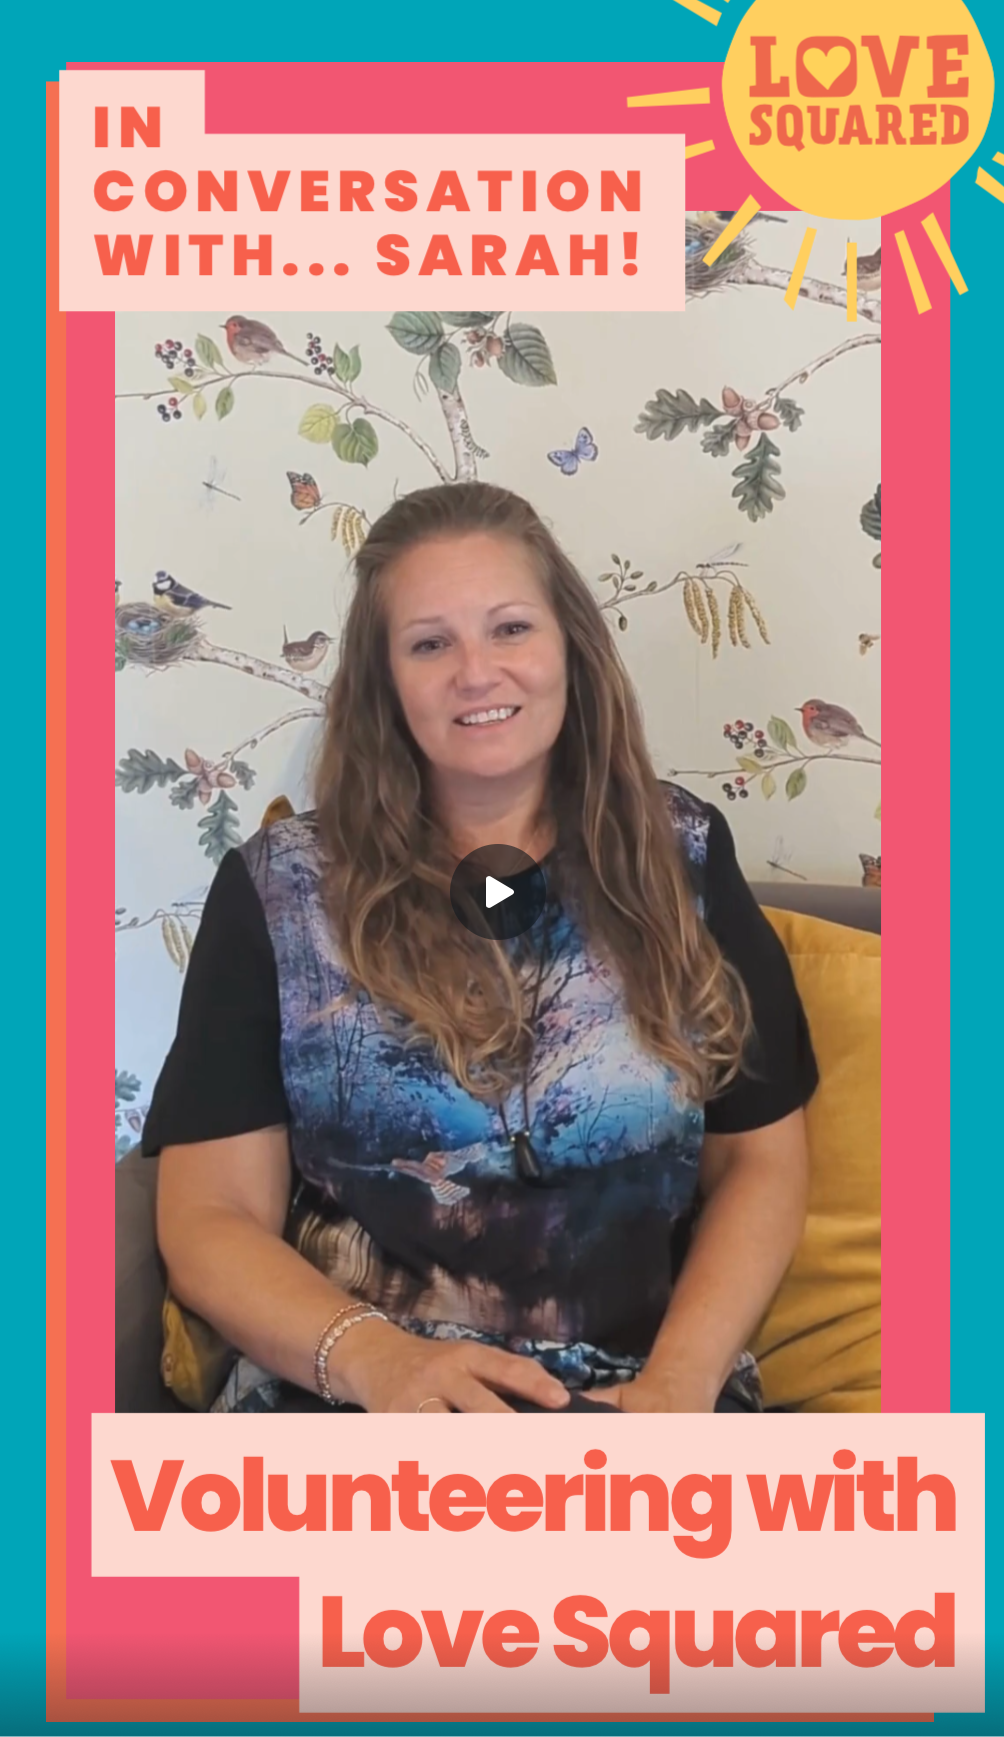 Sarah, a volunteer sits smiling while talking about her volunteer journey with us. The video heading reads 'in conversation with Sarah' and 'Volunteering with Love Squared'.